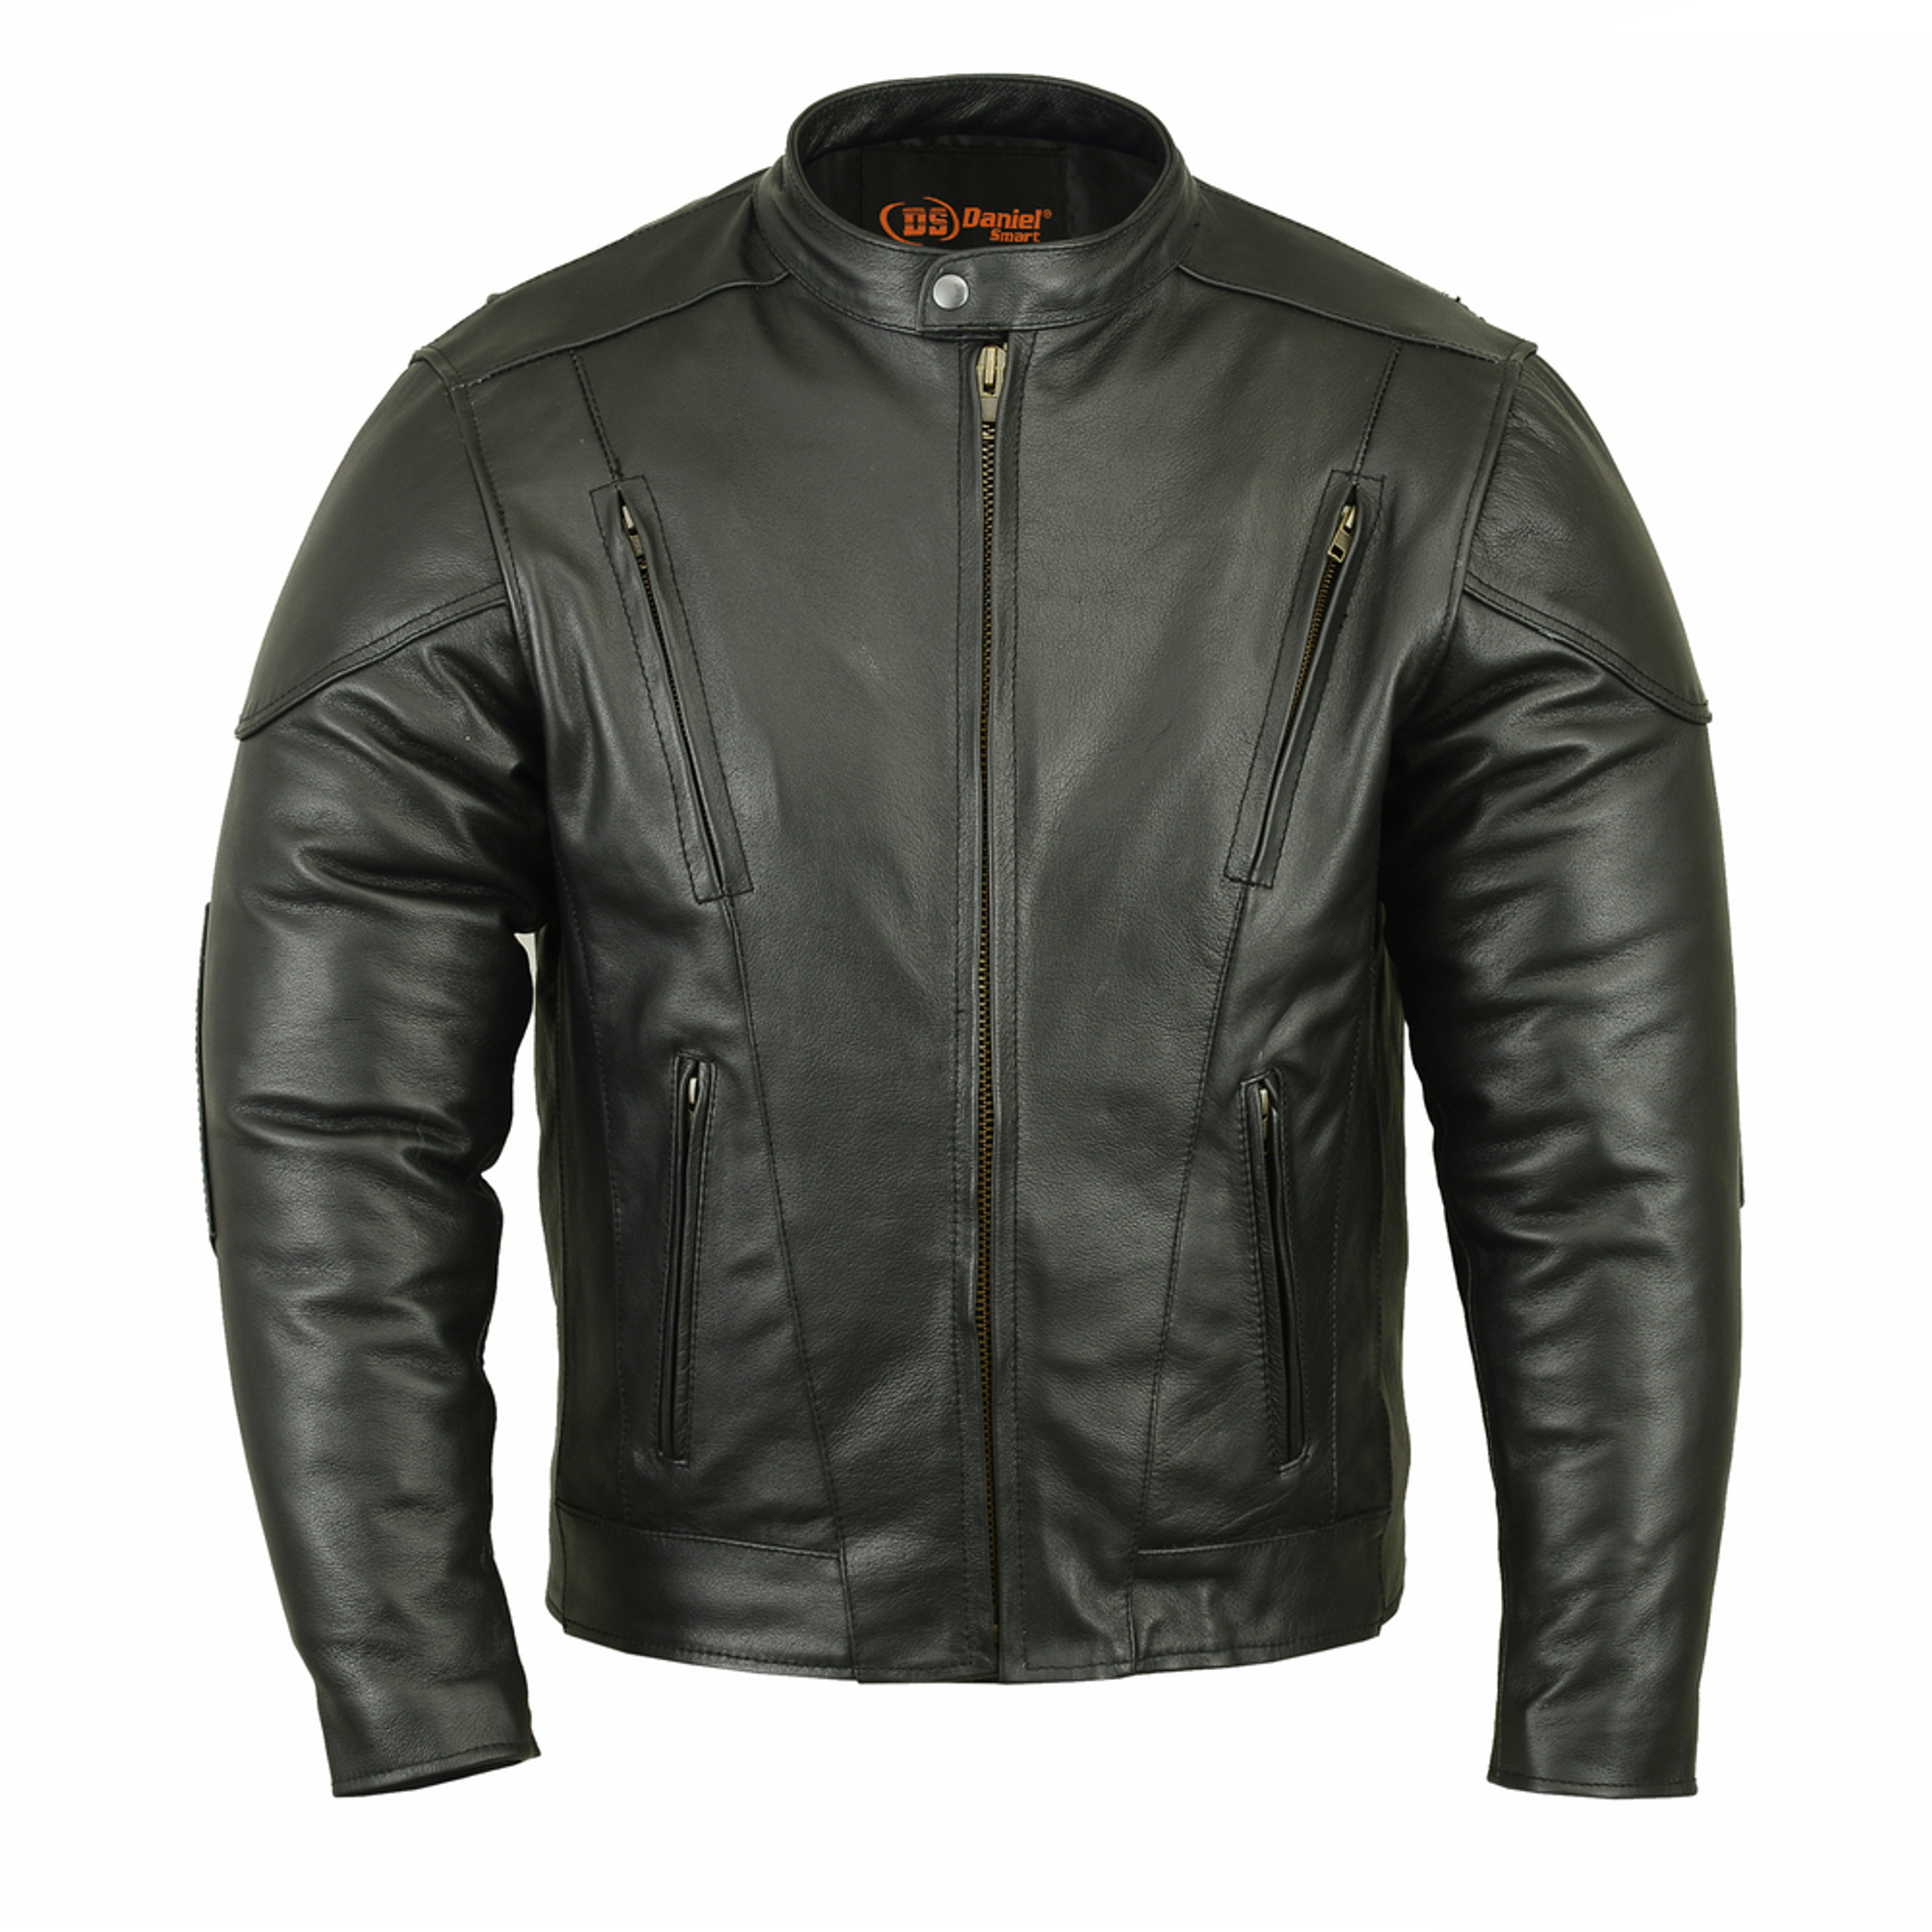 Big and Tall Leather Motorcycle Jackets For Men